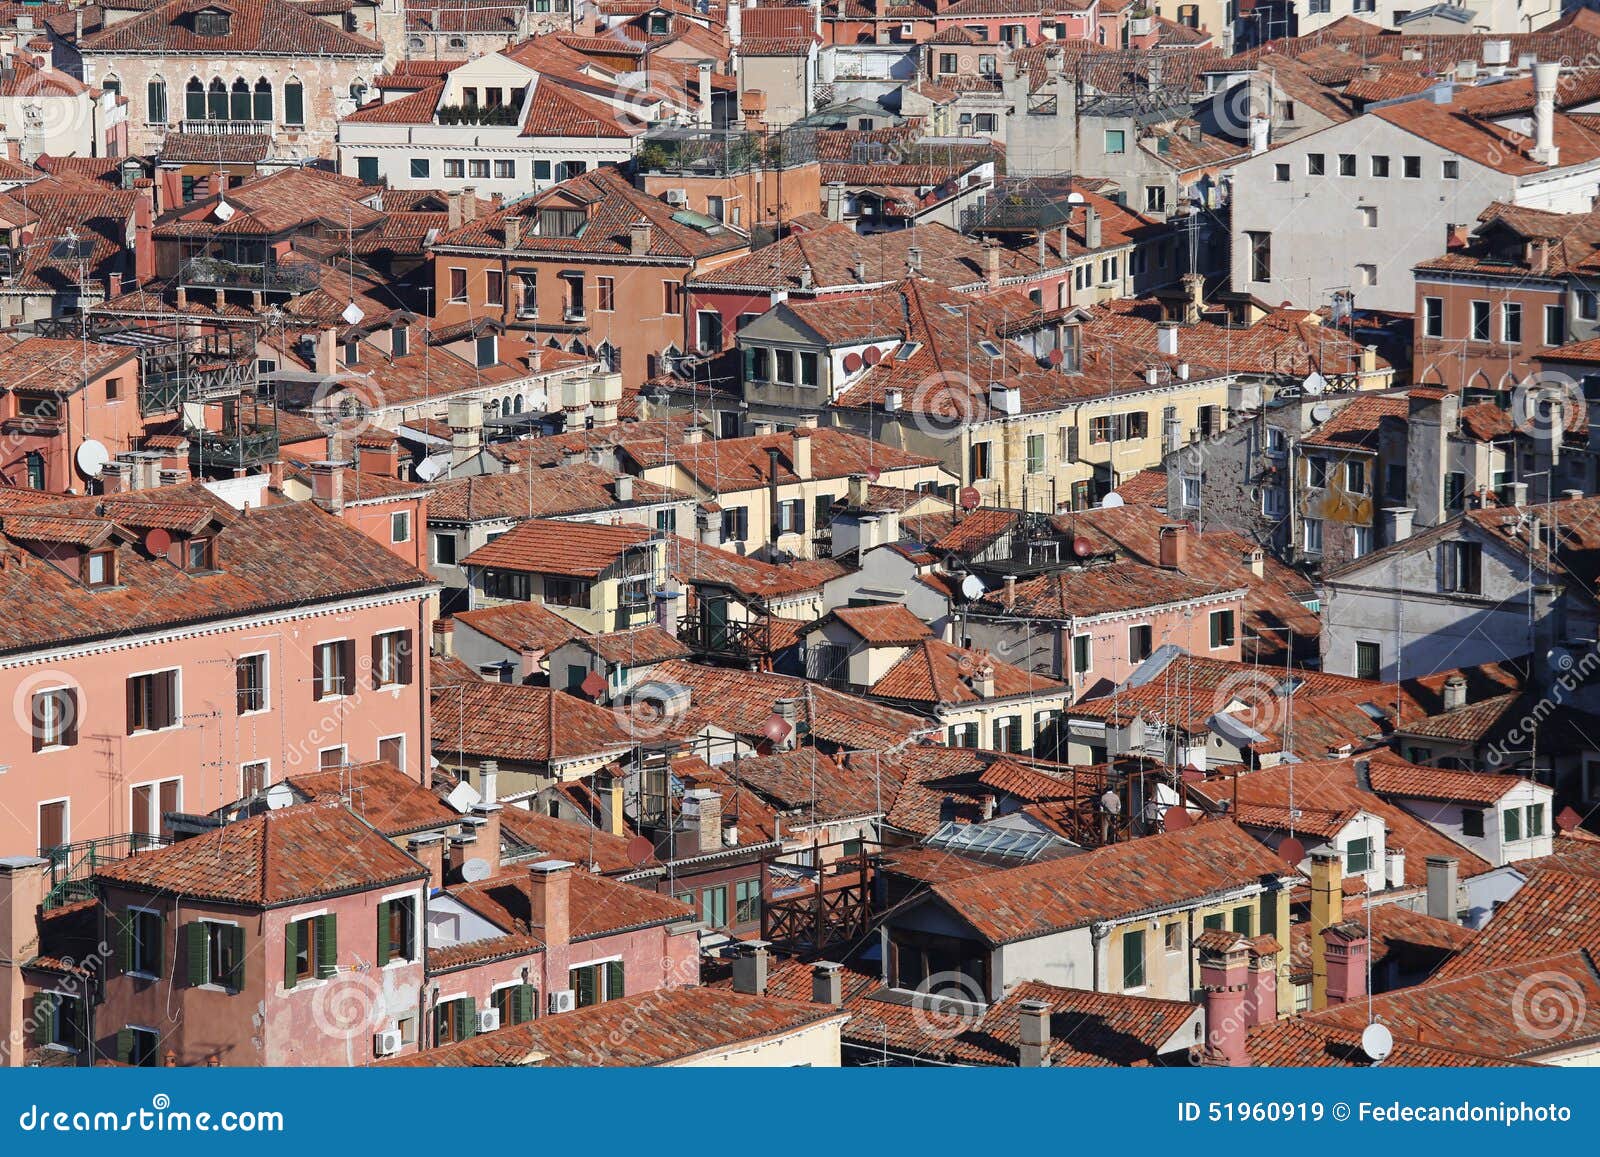 houses with red-tile roofs and bricks in southern europe